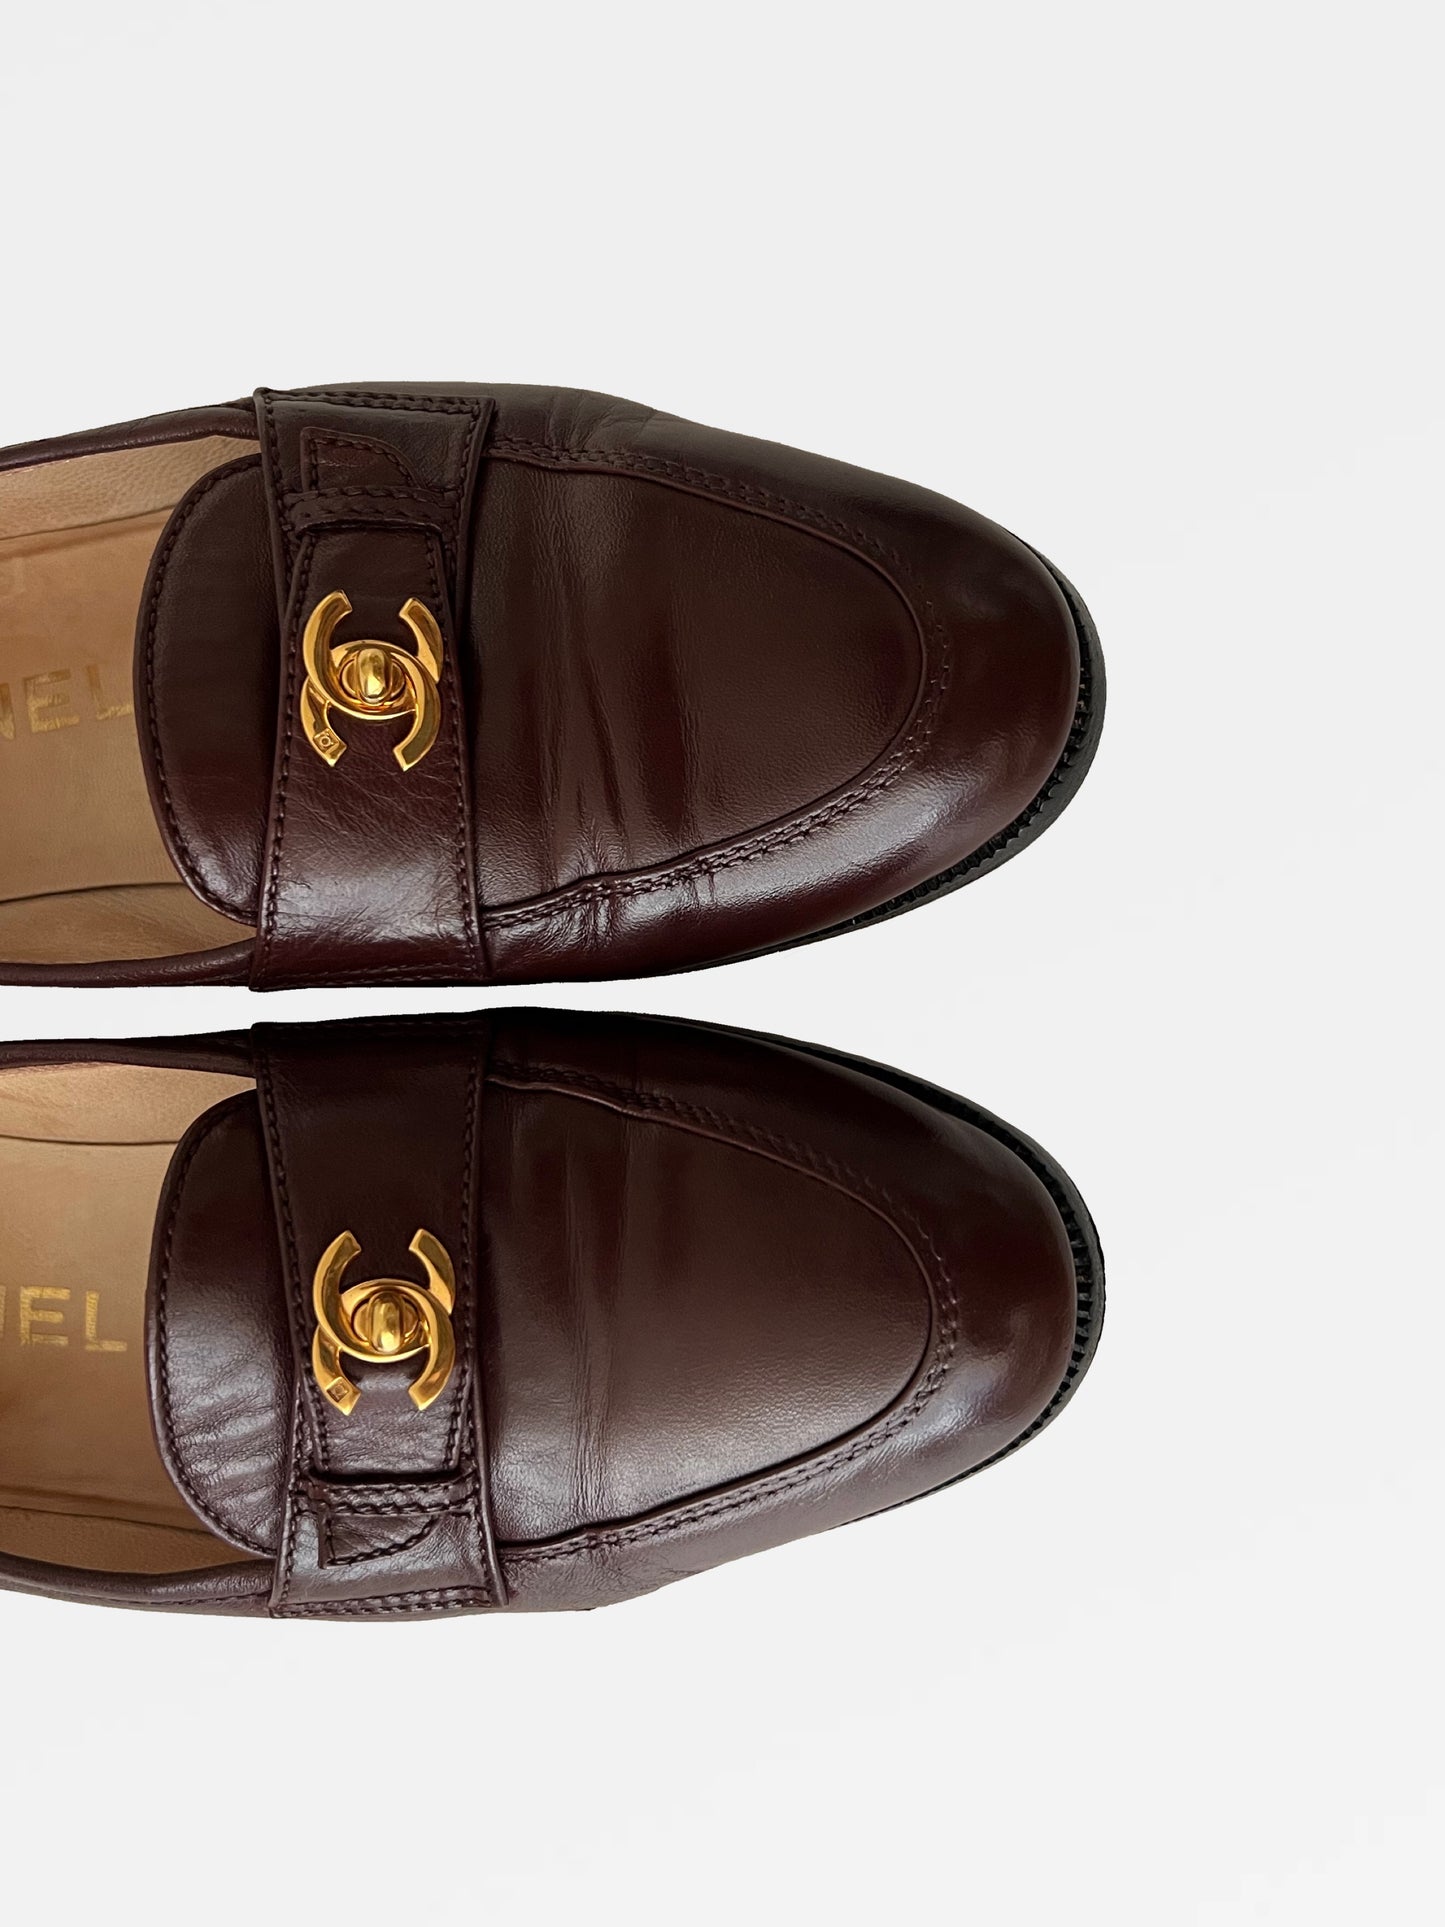 Chanel Loafers, IT 37.5